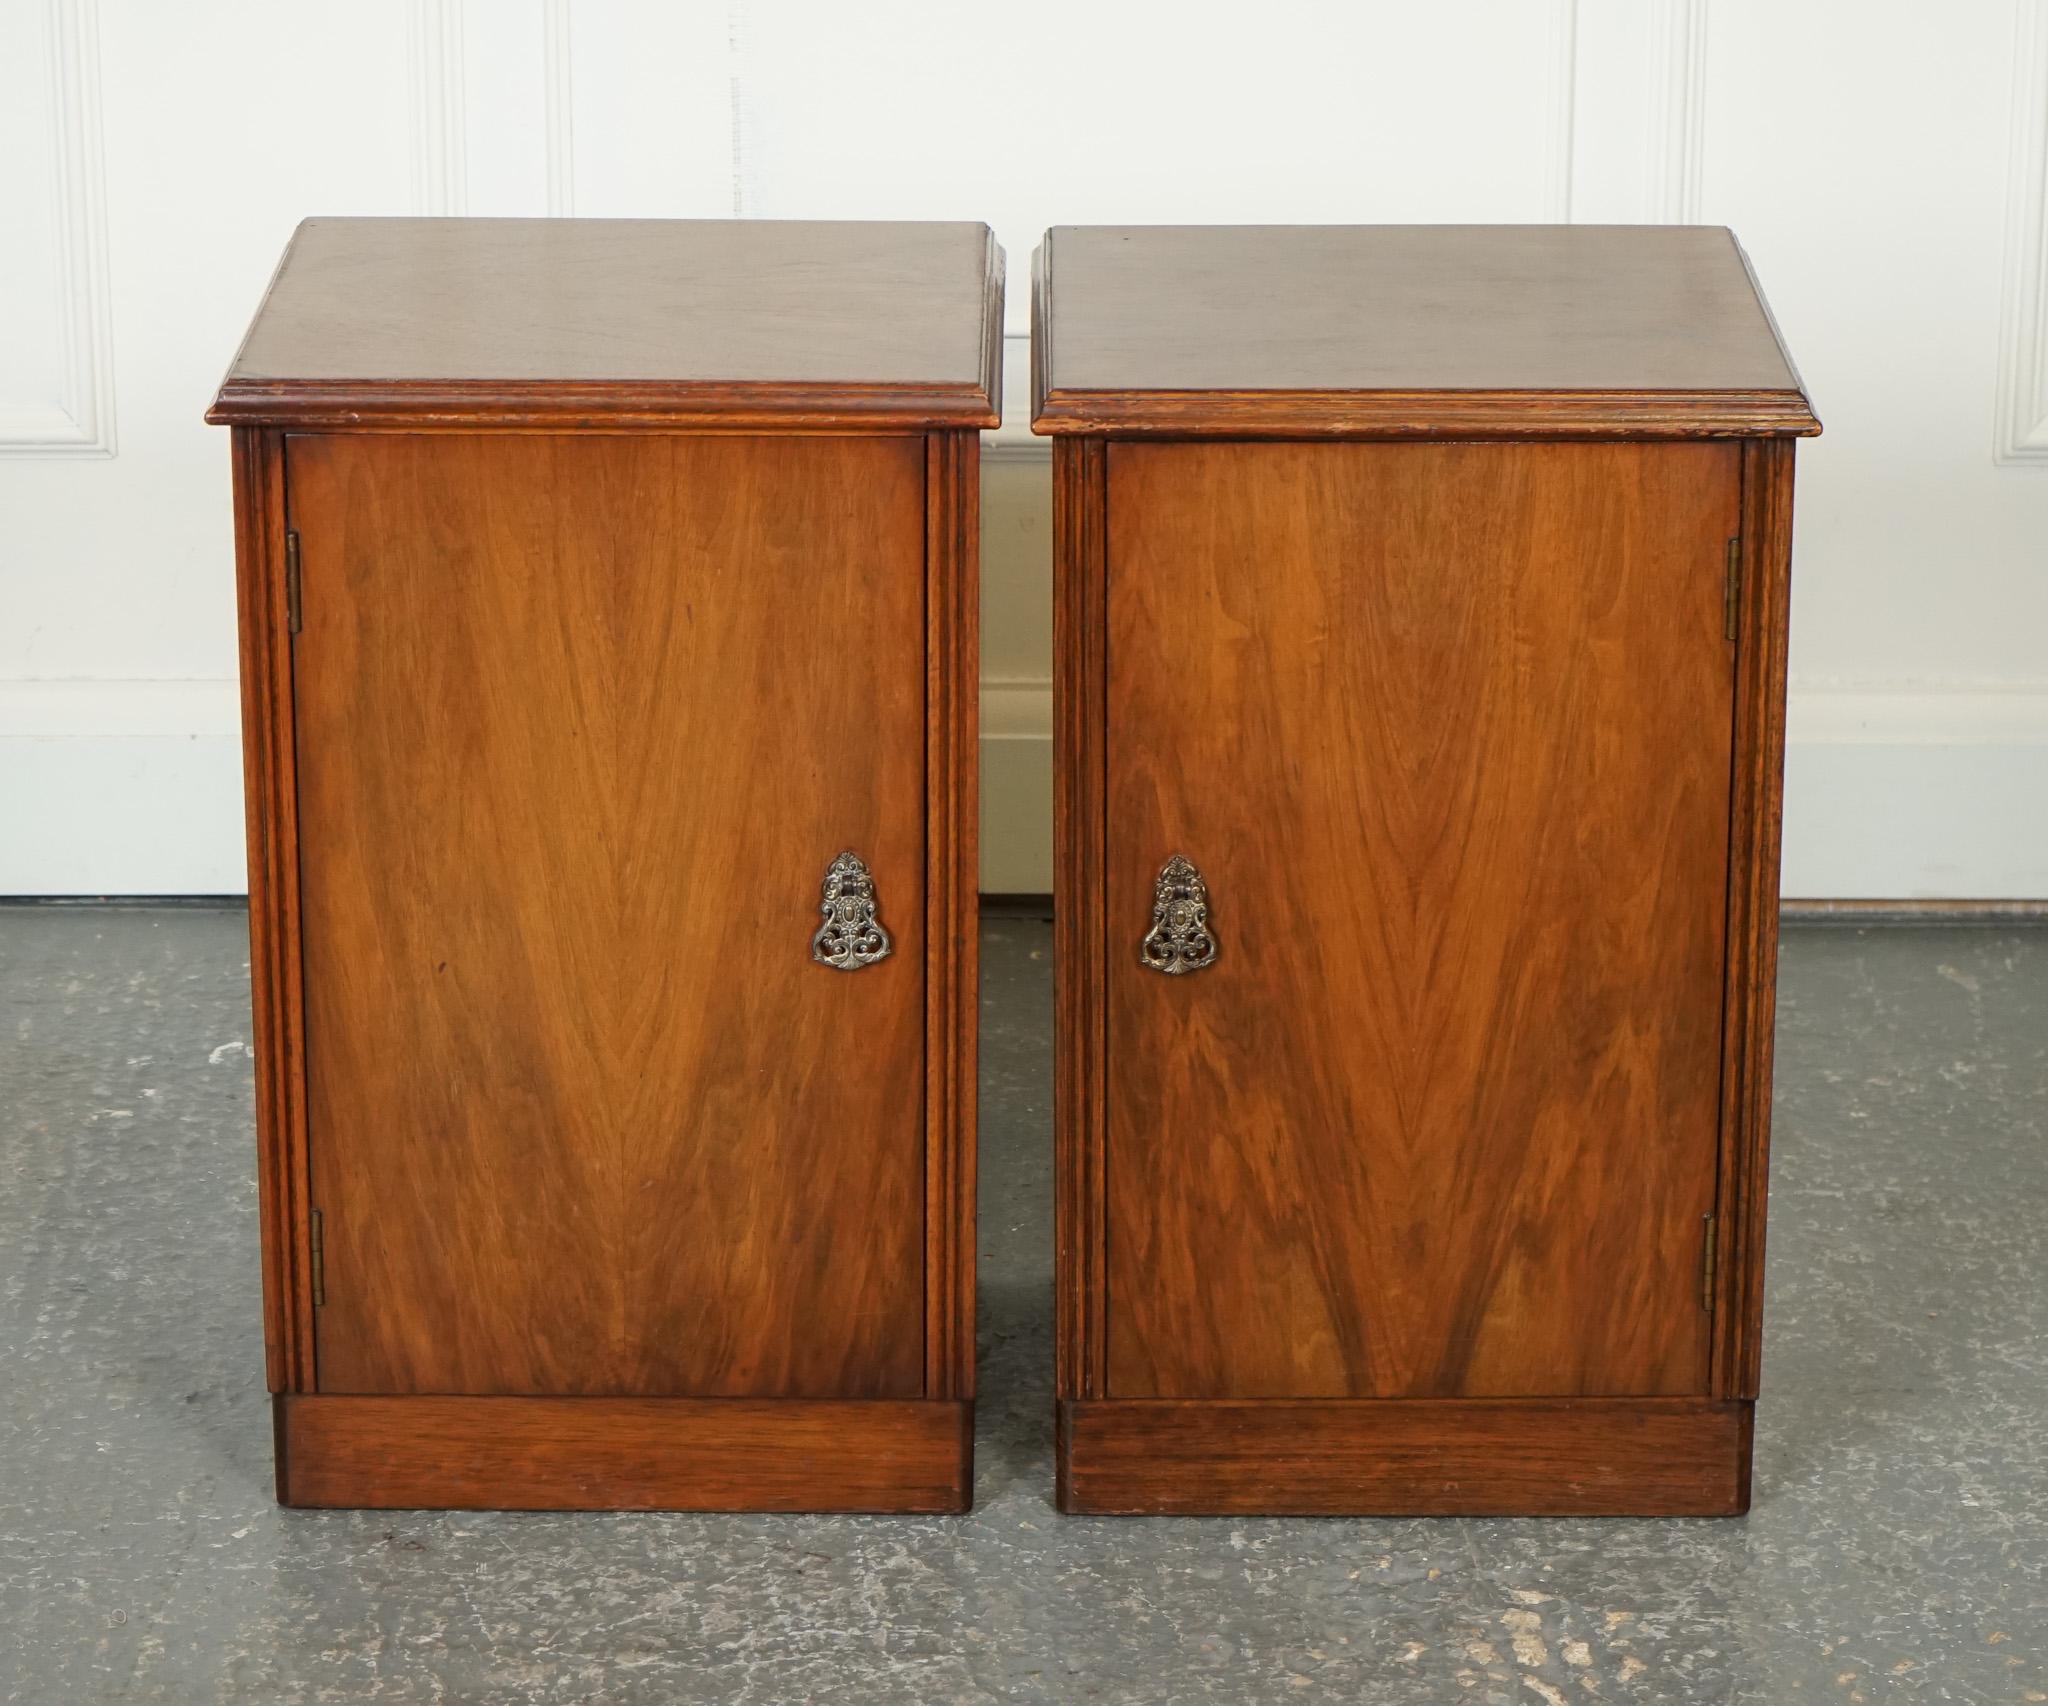 Art Deco PAIR 1920'S ART DECO BEDSIDE NIGHTSTANDS SIDE END LAMP TABLES WiTH STORAGE SPACE